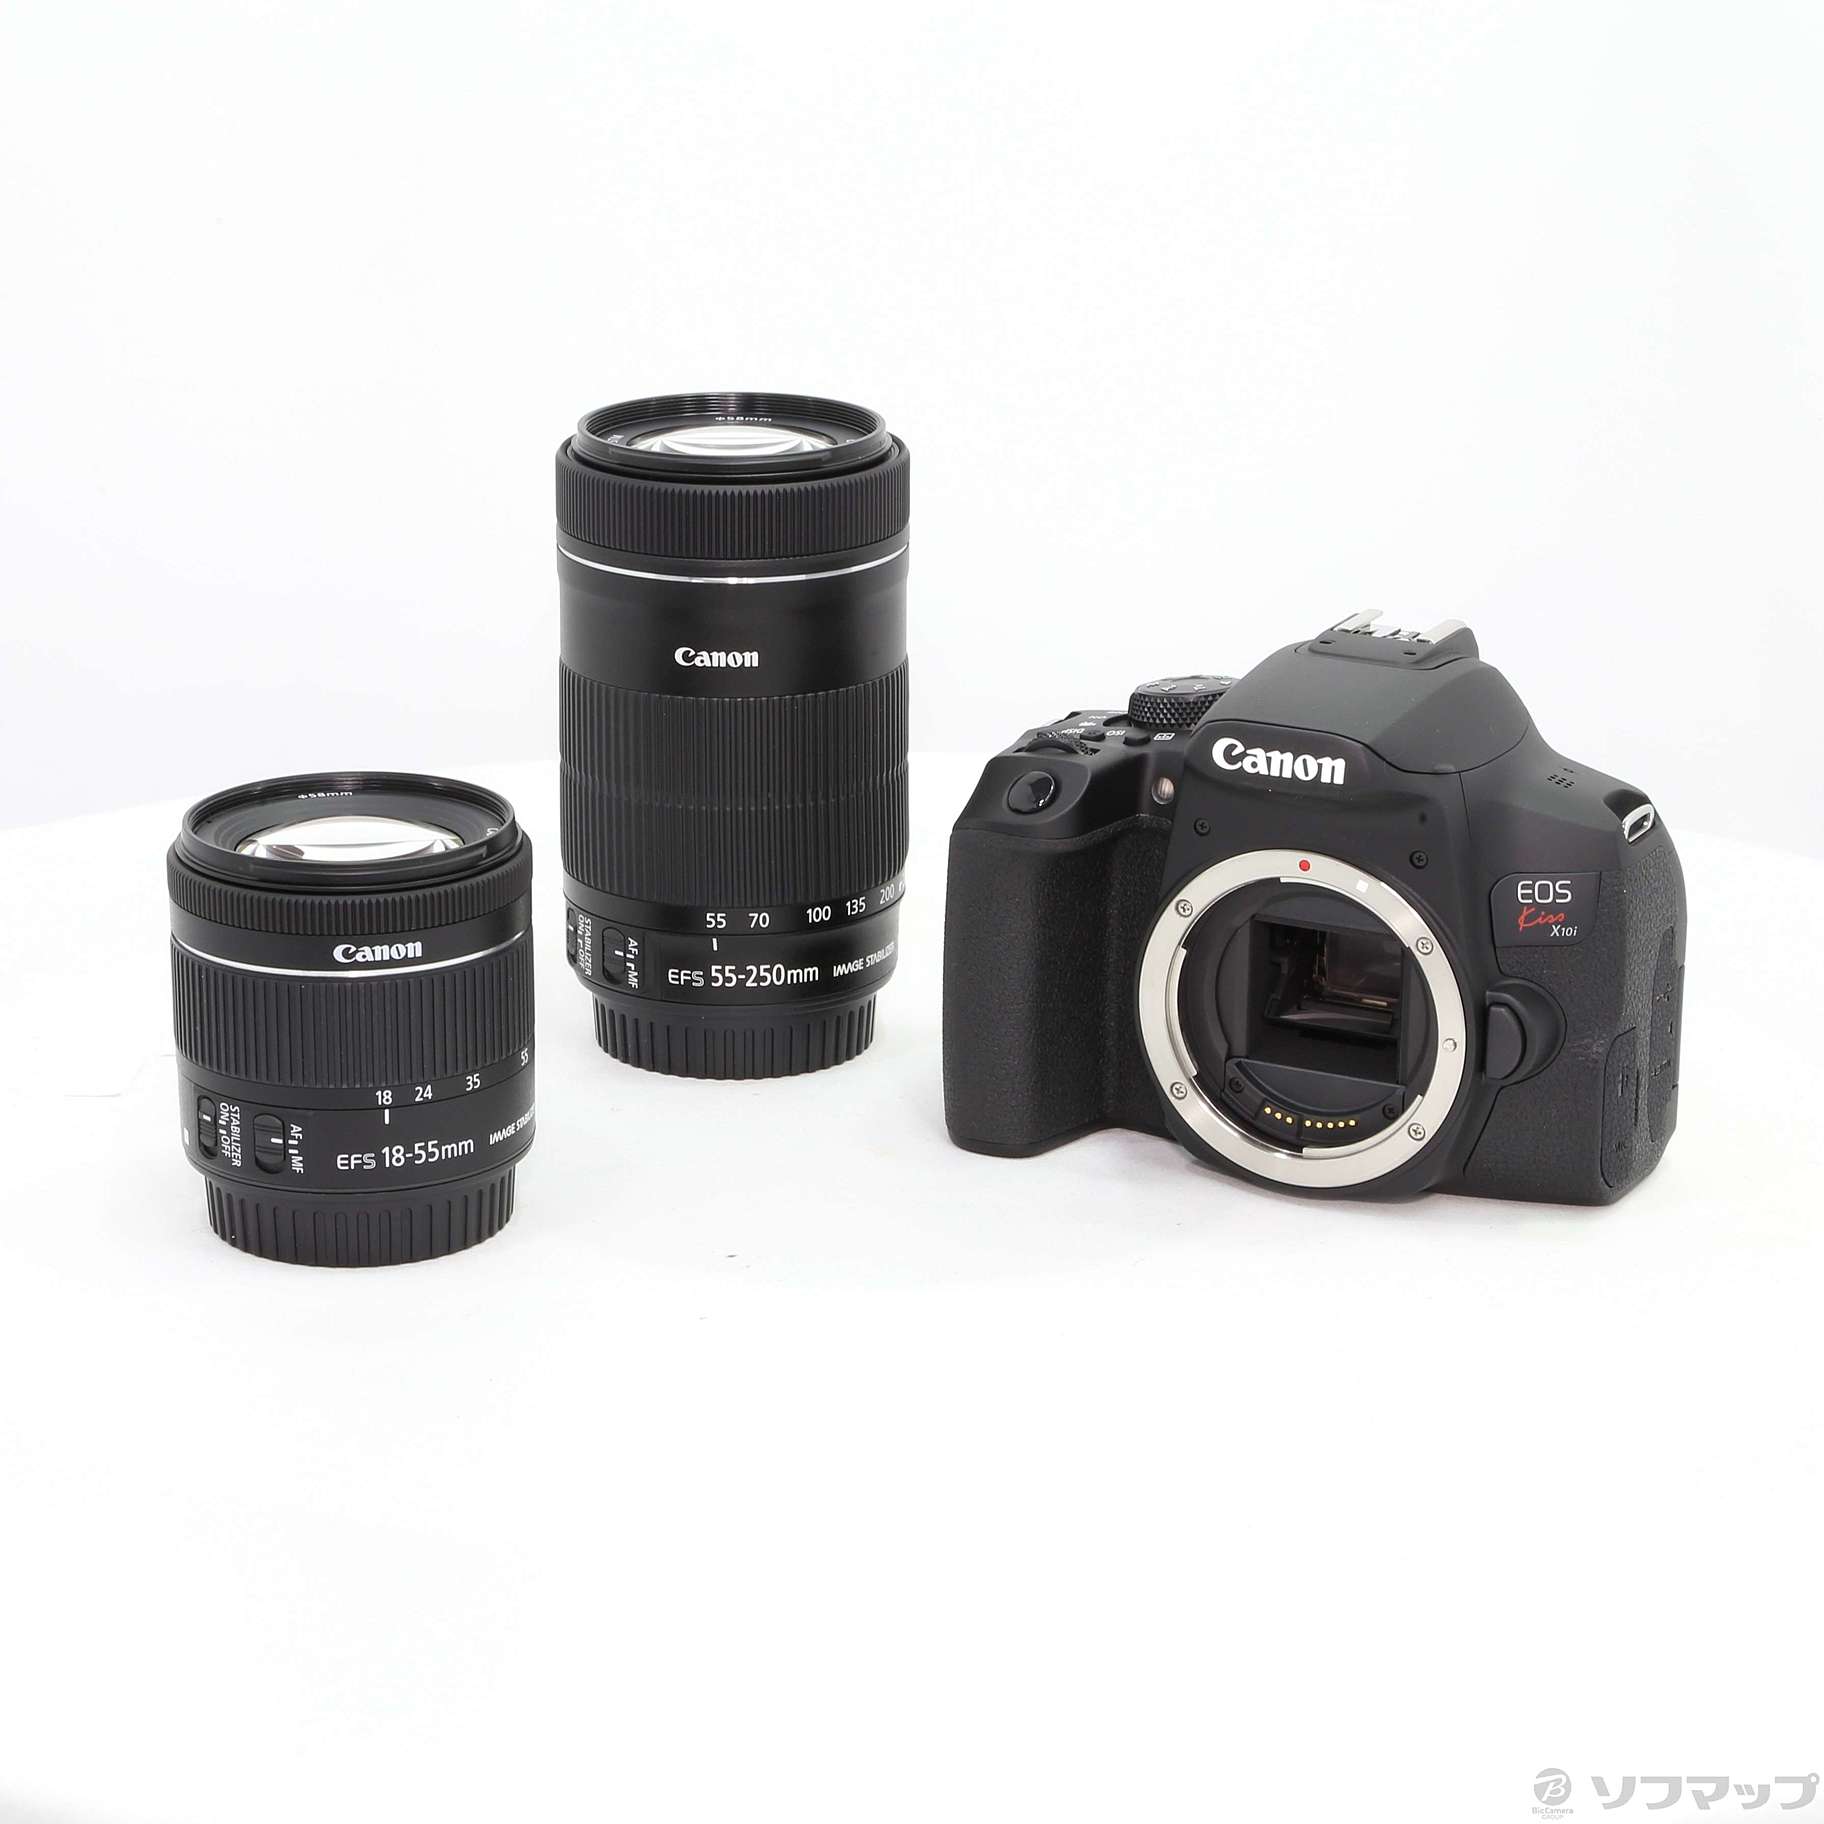 Canon EOS Kiss X10i ダブルズームキット2021年に新品購入